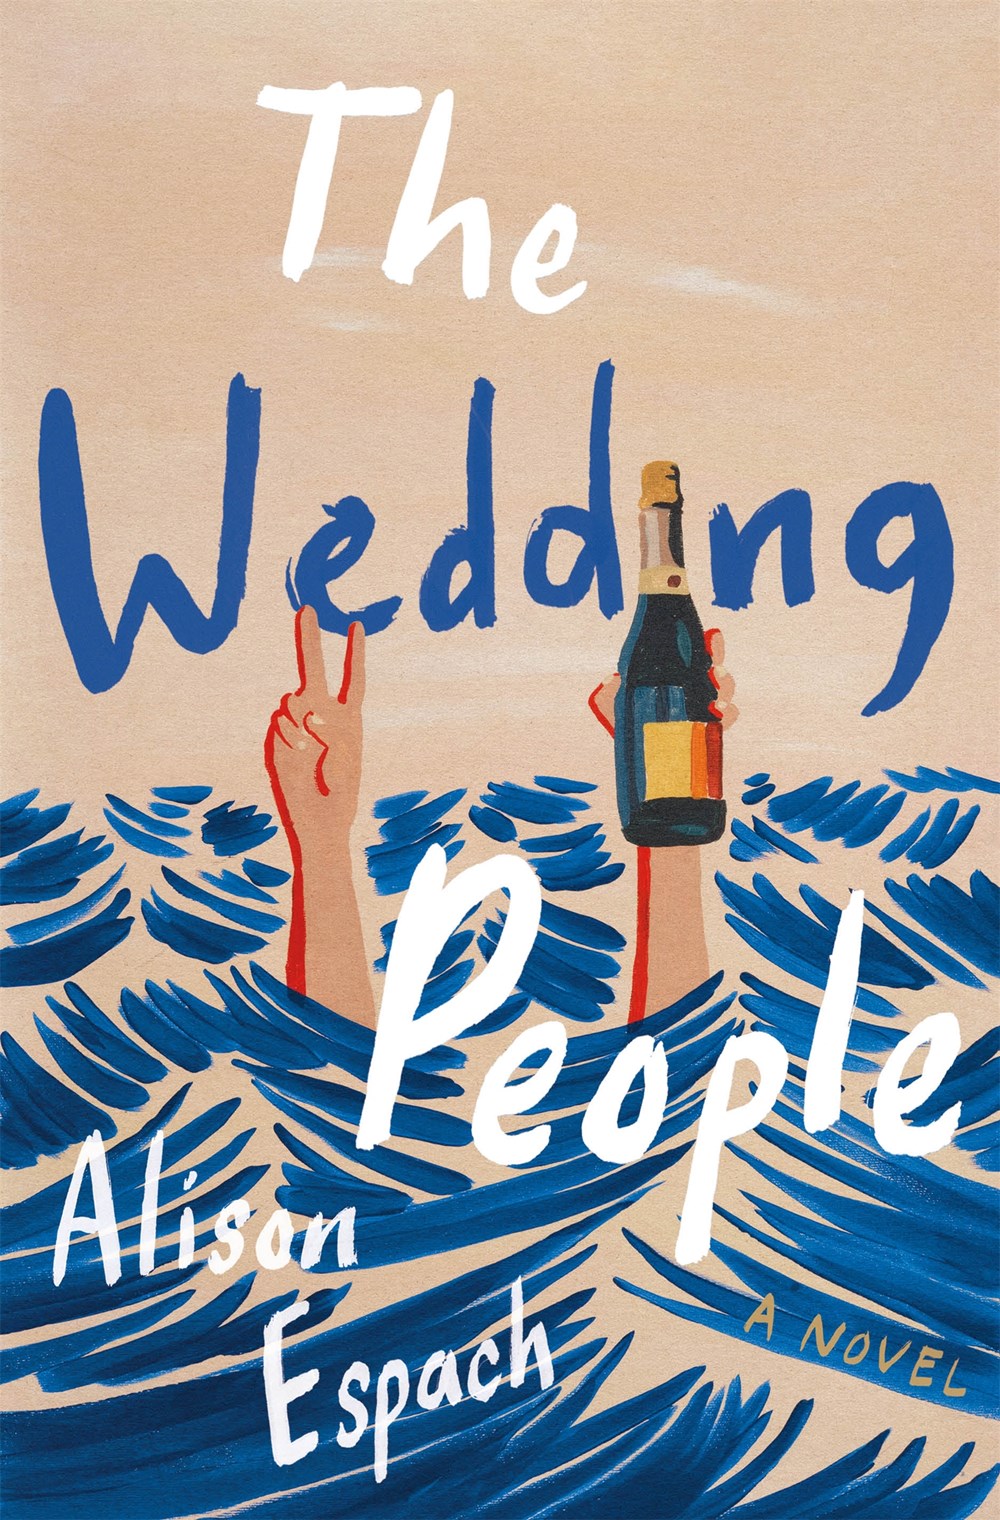 The Wedding People: A Novel by Alison Espach (7/30/24)